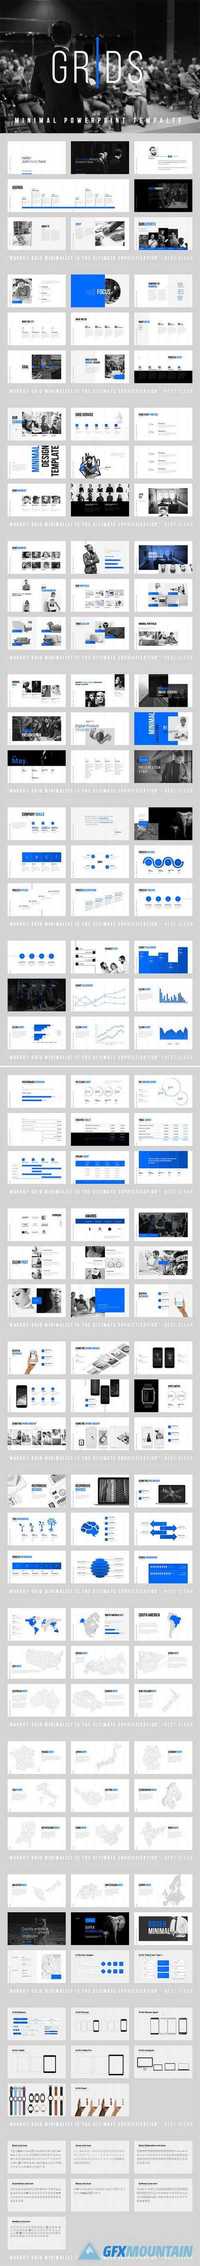 Grids-Minimal Powerpoint Template 849891